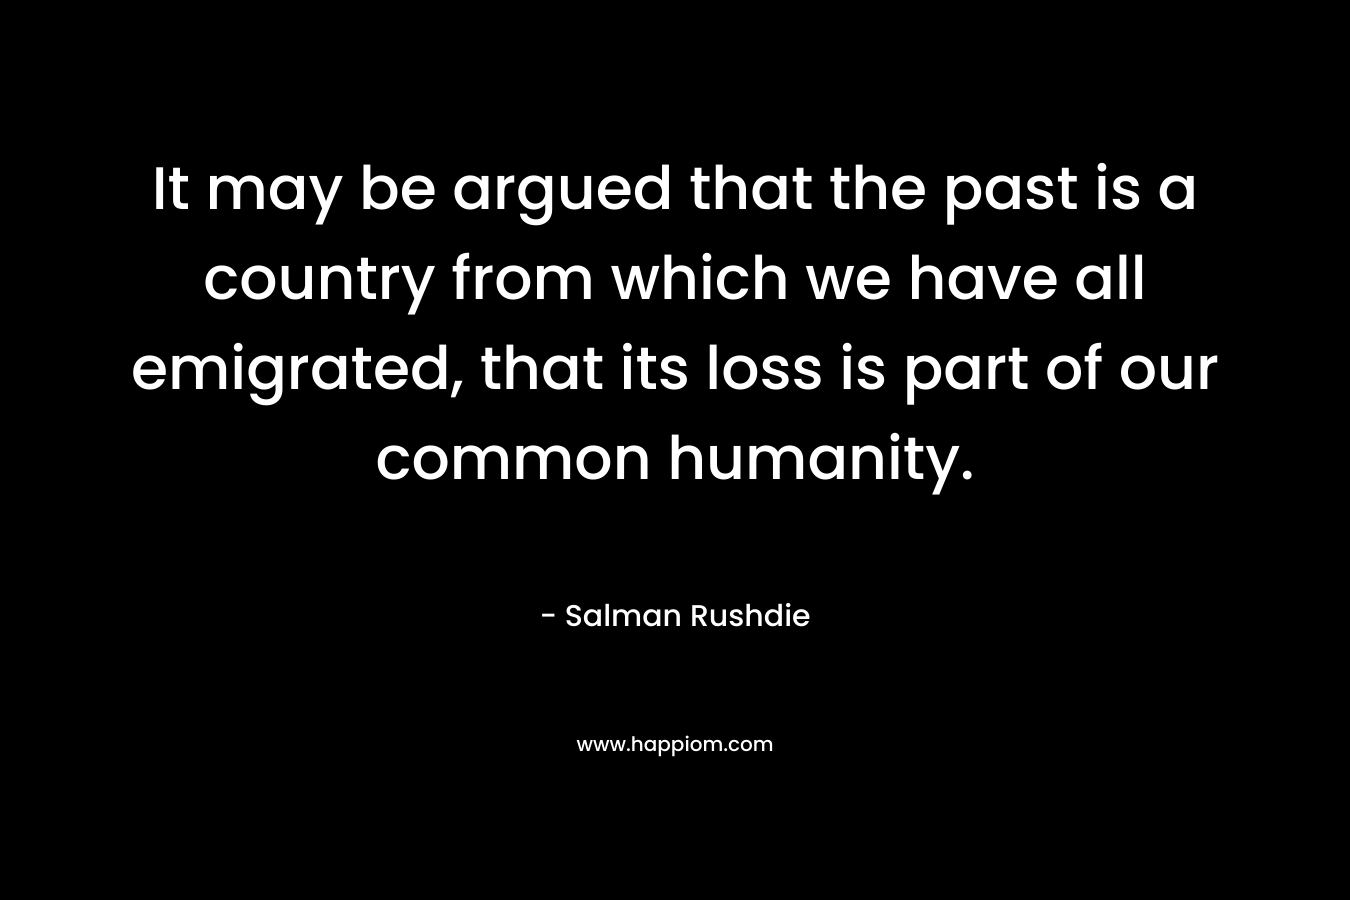 It may be argued that the past is a country from which we have all emigrated, that its loss is part of our common humanity. – Salman Rushdie